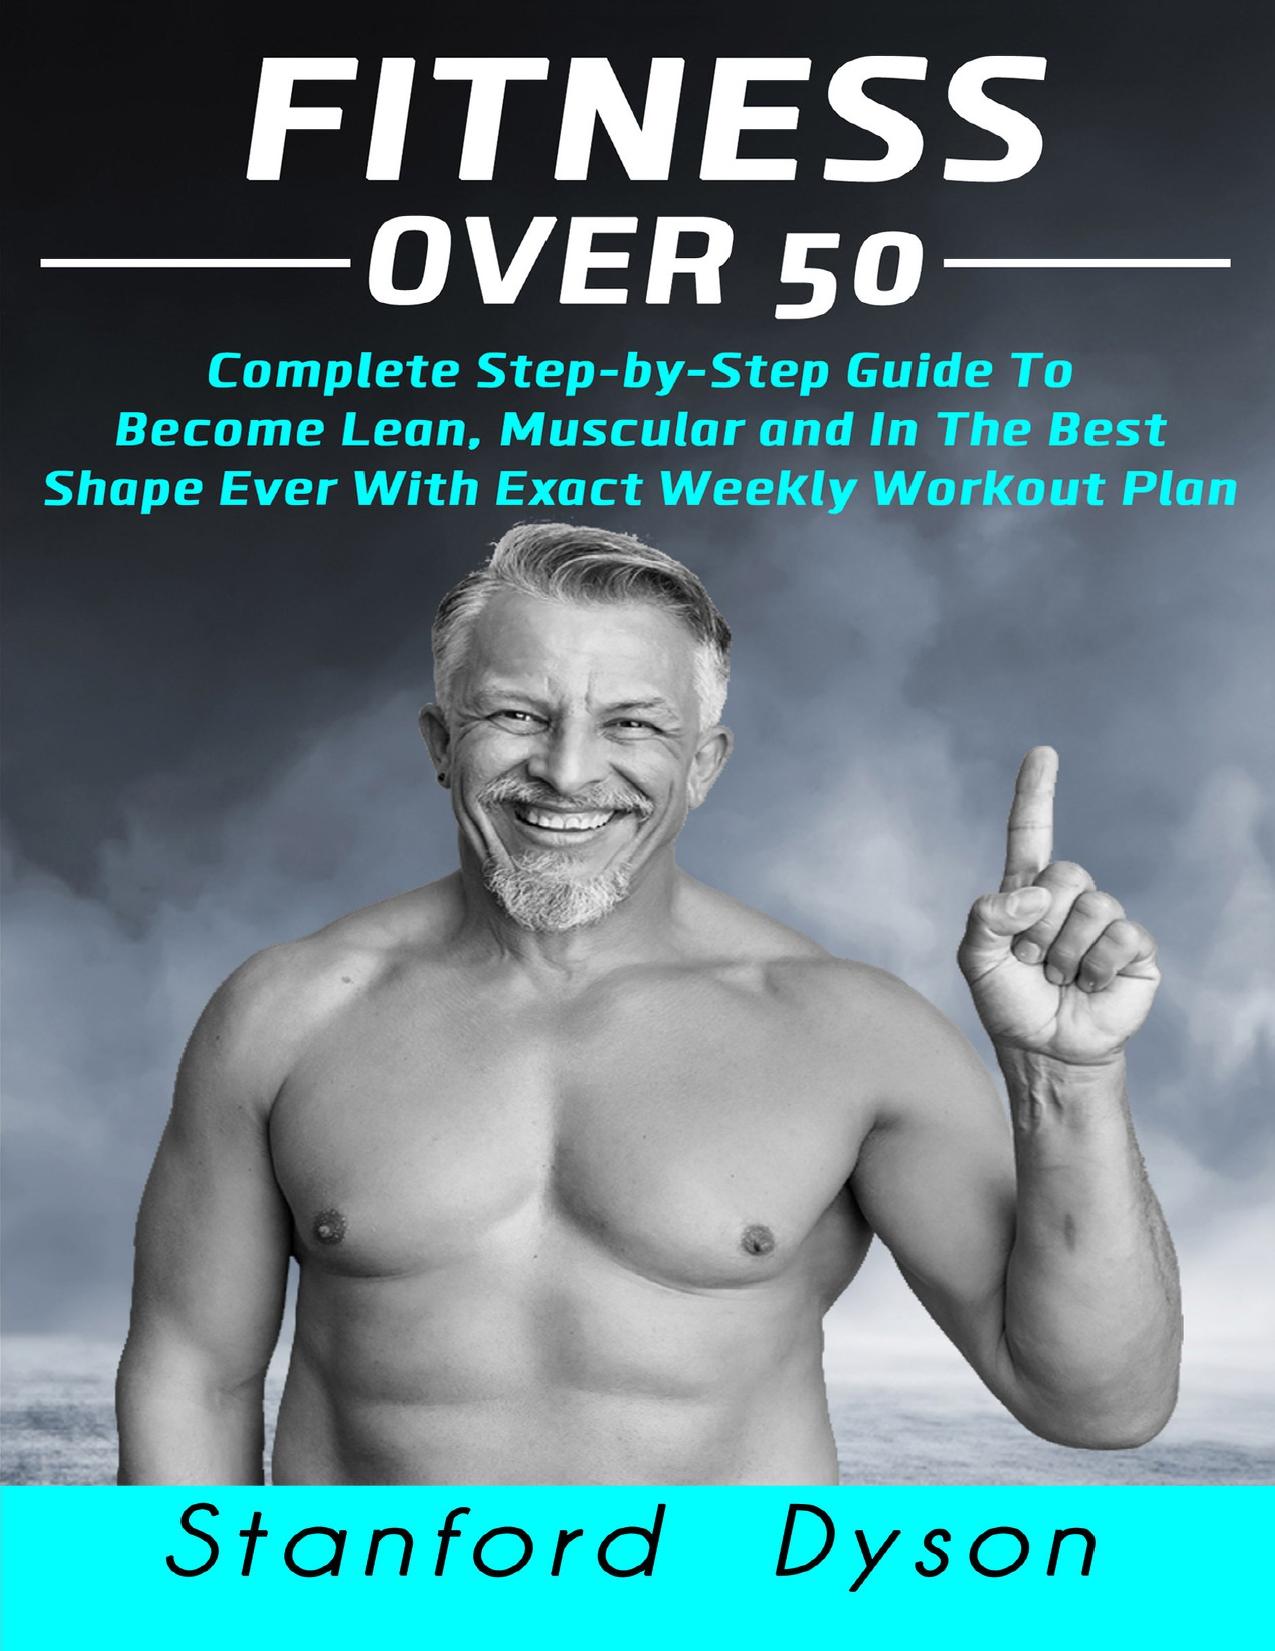 Fitness Over 50: Complete Step-by-Step Guide To Become Lean, Muscular and In The Best Shape Ever With Exact Weekly Workout Plan by Stanford Dyson